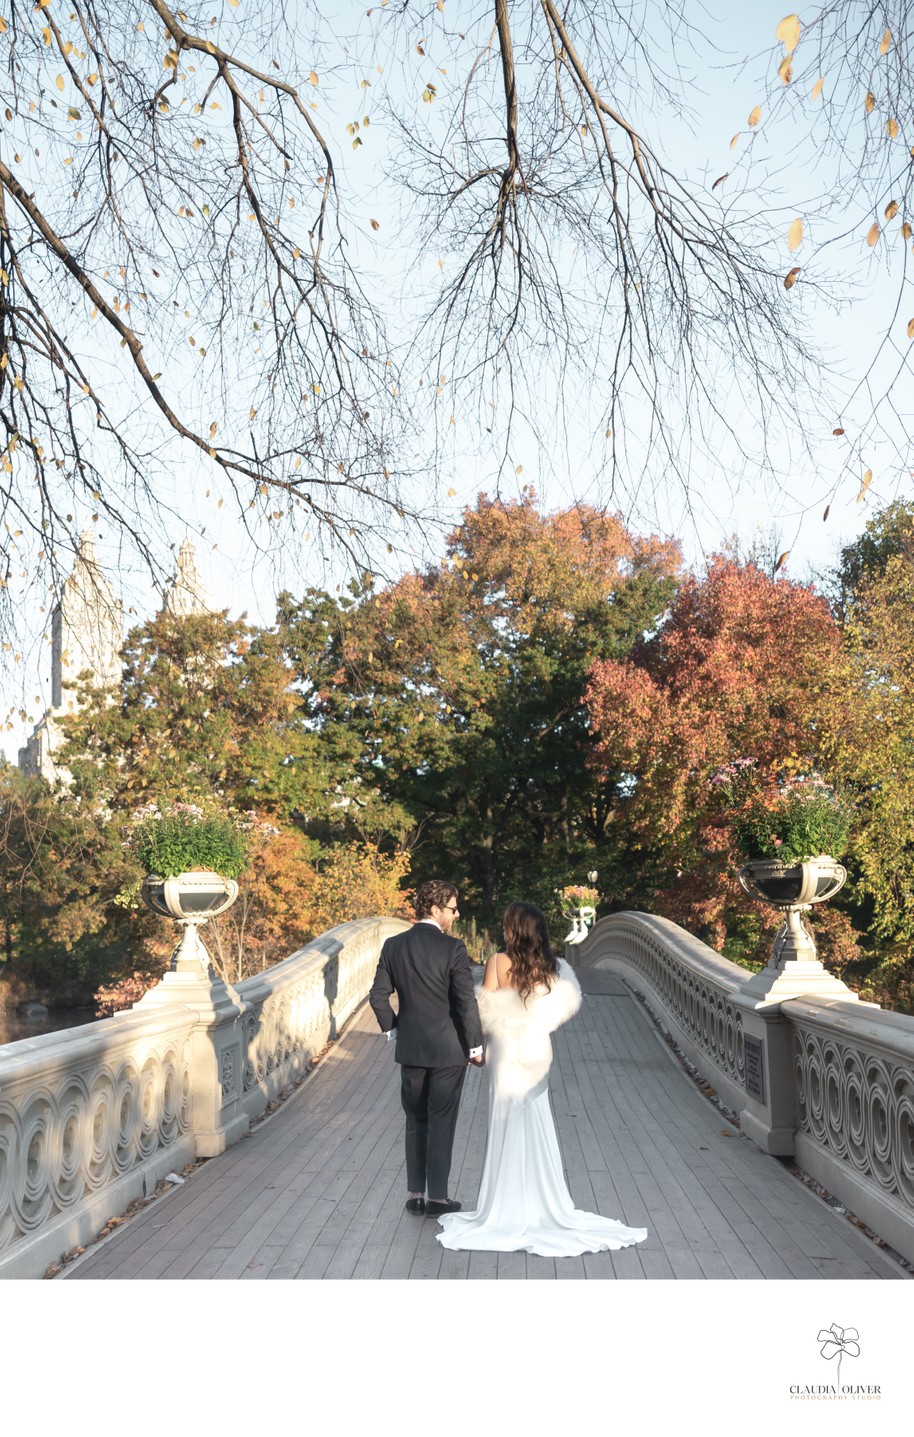 NYC Engagement Photographer: Bow Bridge Central Park NYC